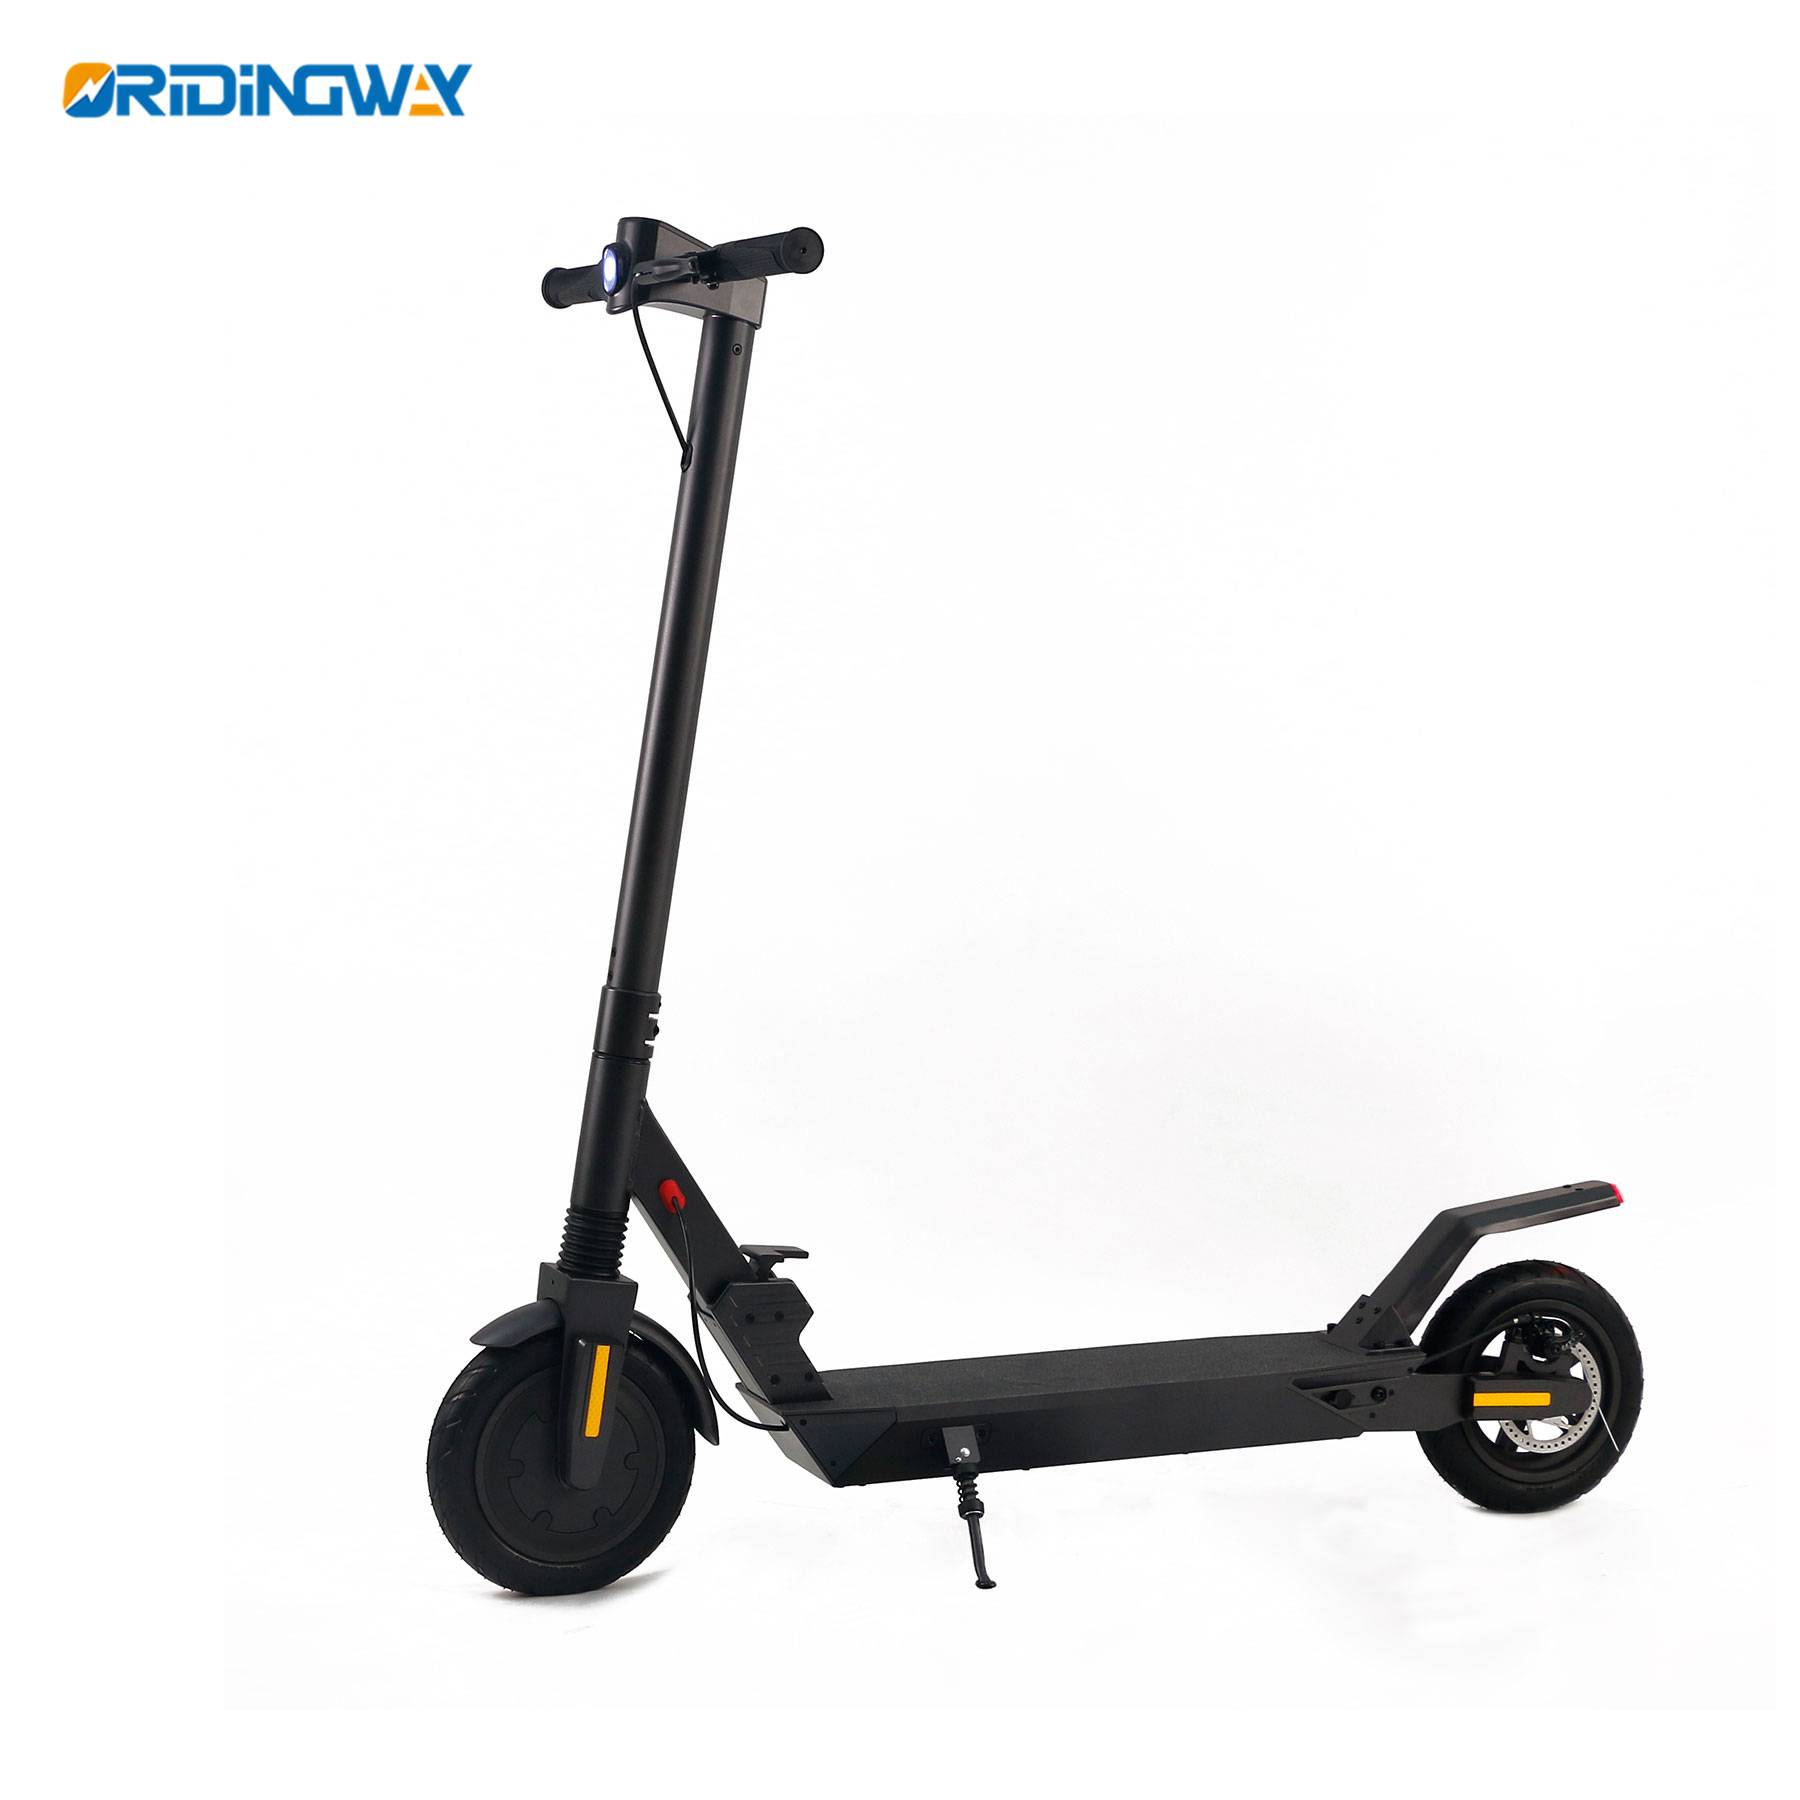 ORIDINGWAY best electric scooter two wheeler (8)